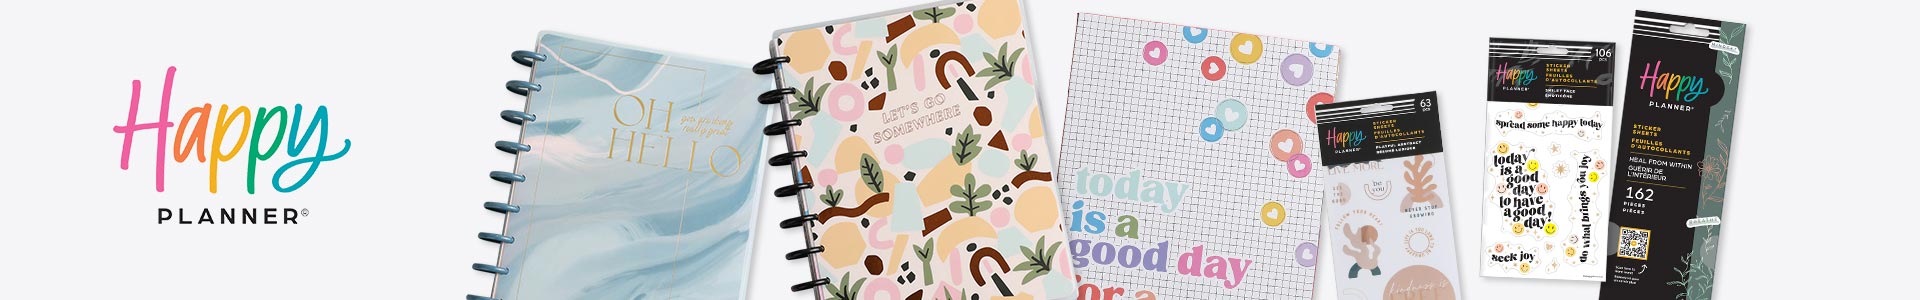 Happy Planner journals, planners, stickers & accessories at JOANN